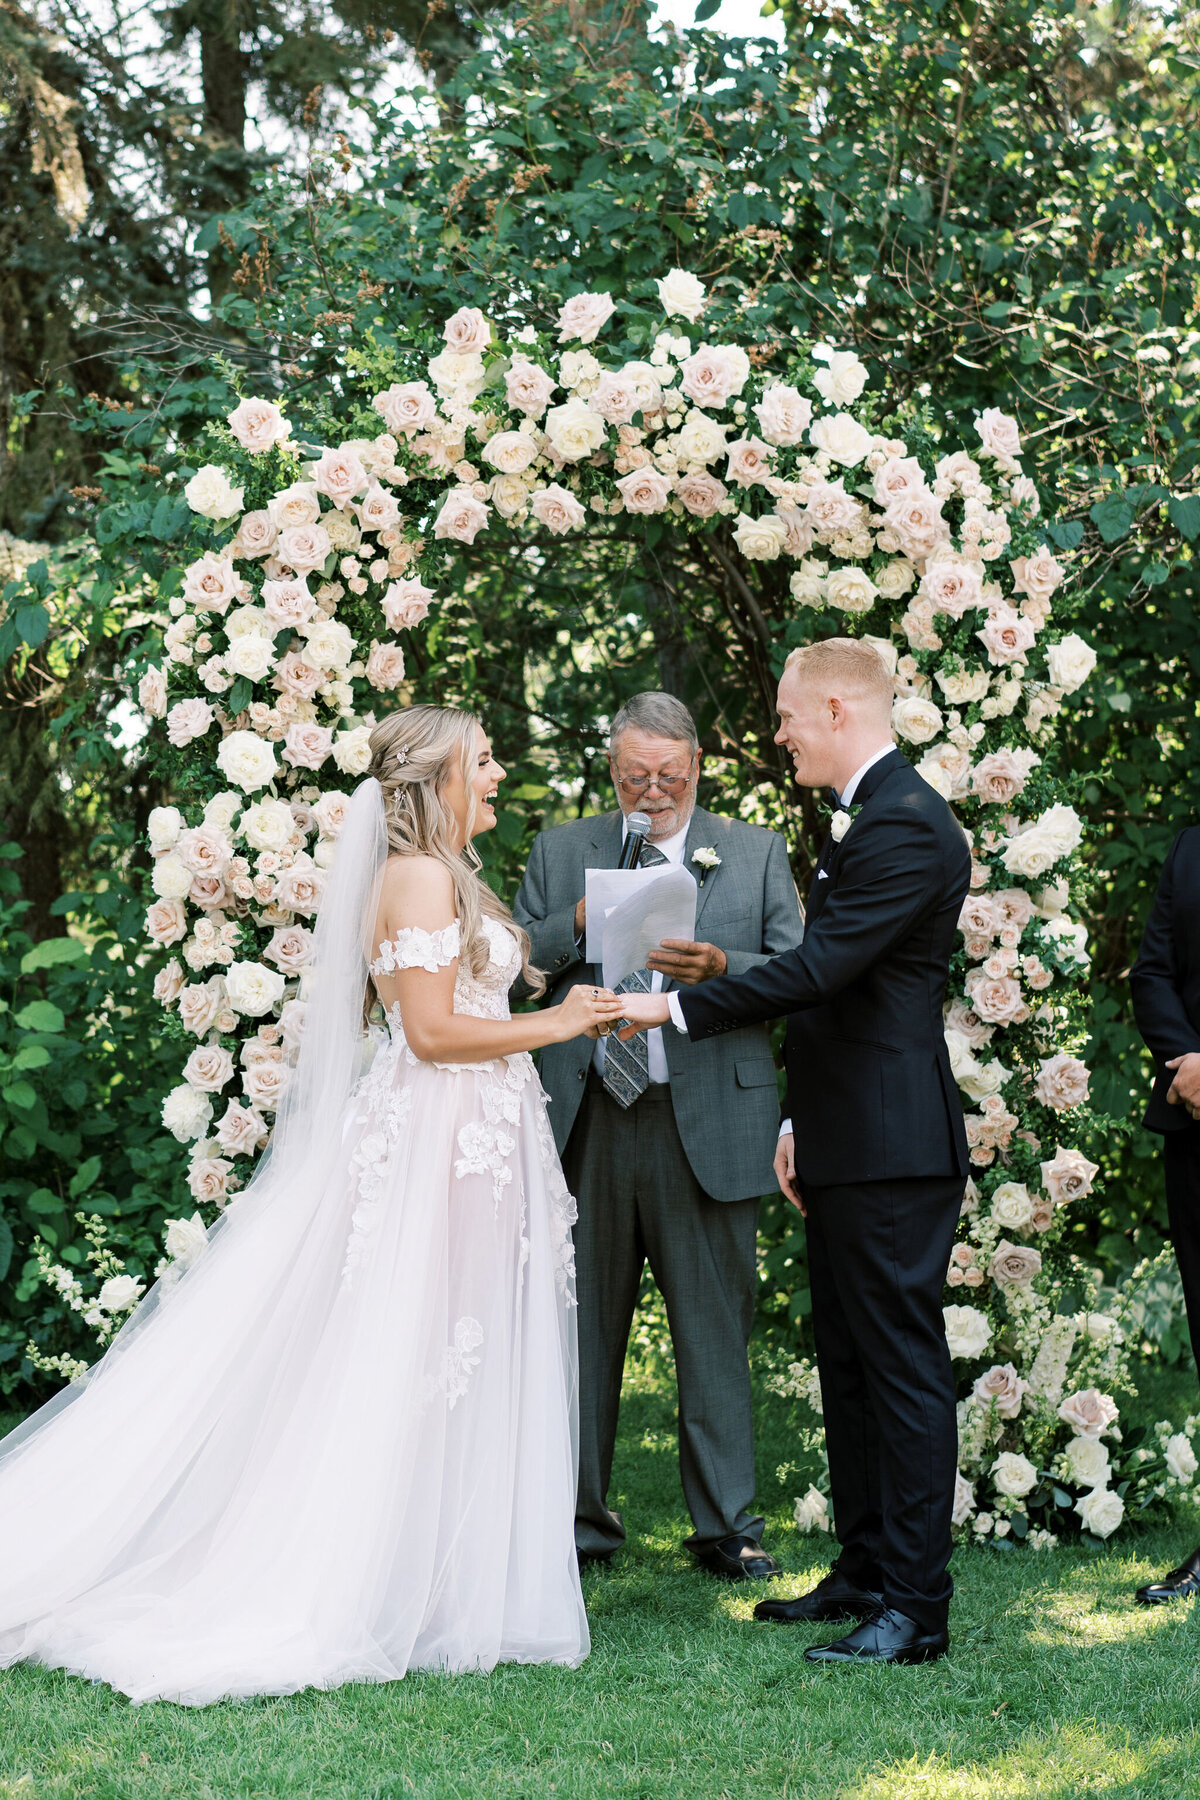 A bride in a white dress and a groom in a black suit exchange vows in an outdoor garden ceremony, standing in front of a floral arch with a person officiating. This enchanting scene unfolds at their destination wedding in Banff, Alberta.